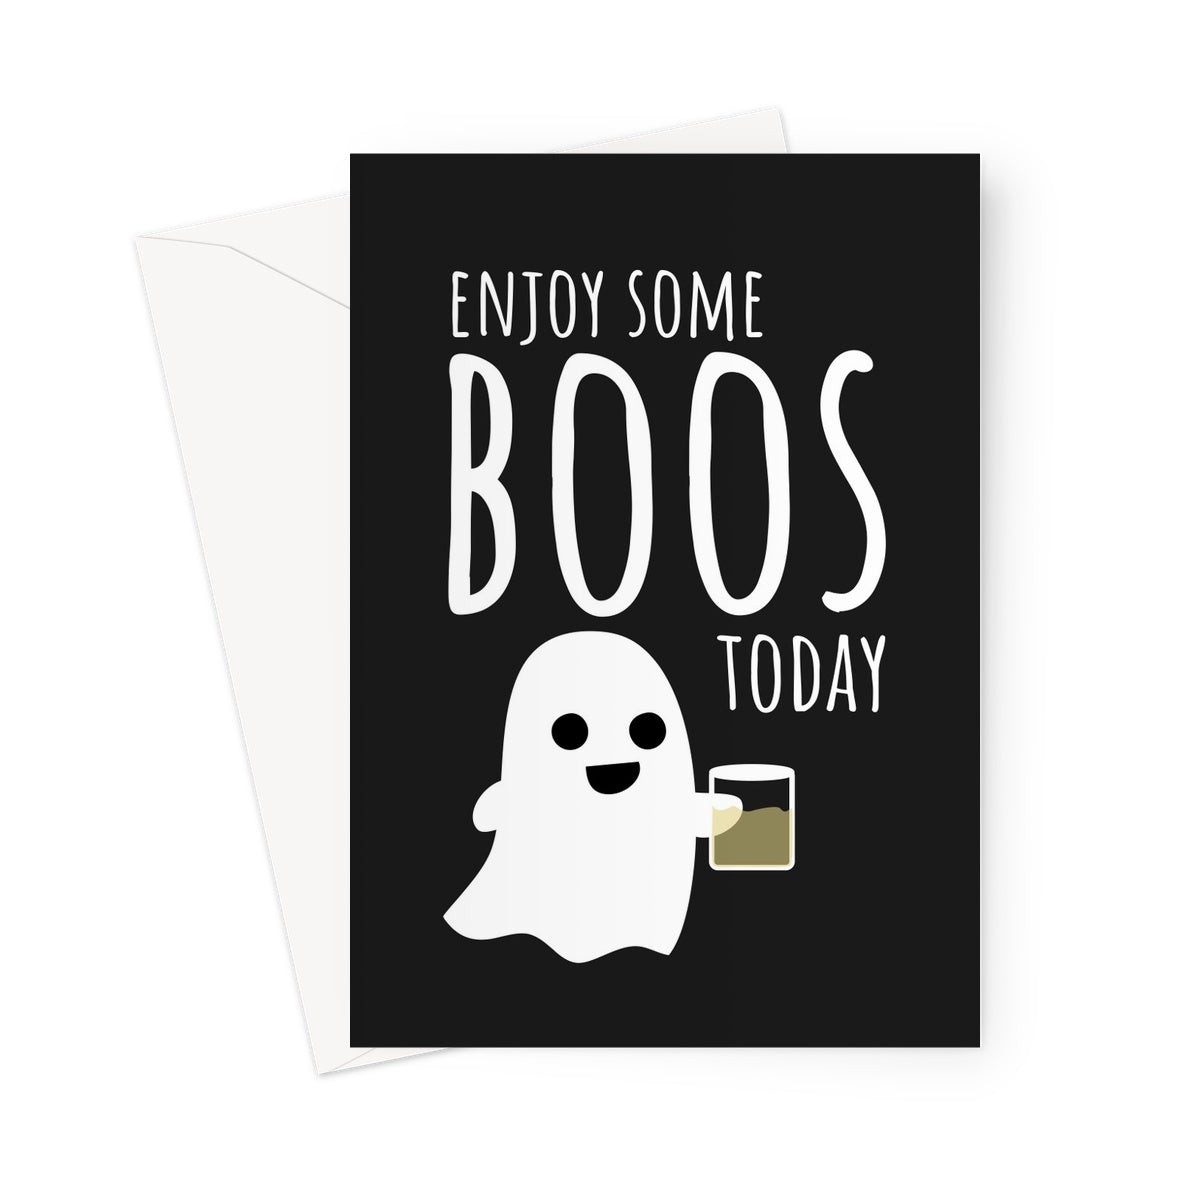 Enjoy Some Boos Today Funny Love Halloween Collection Spooky Ghost Birthday Anniversary Alcohol Booze Beer Wine  Greeting Card